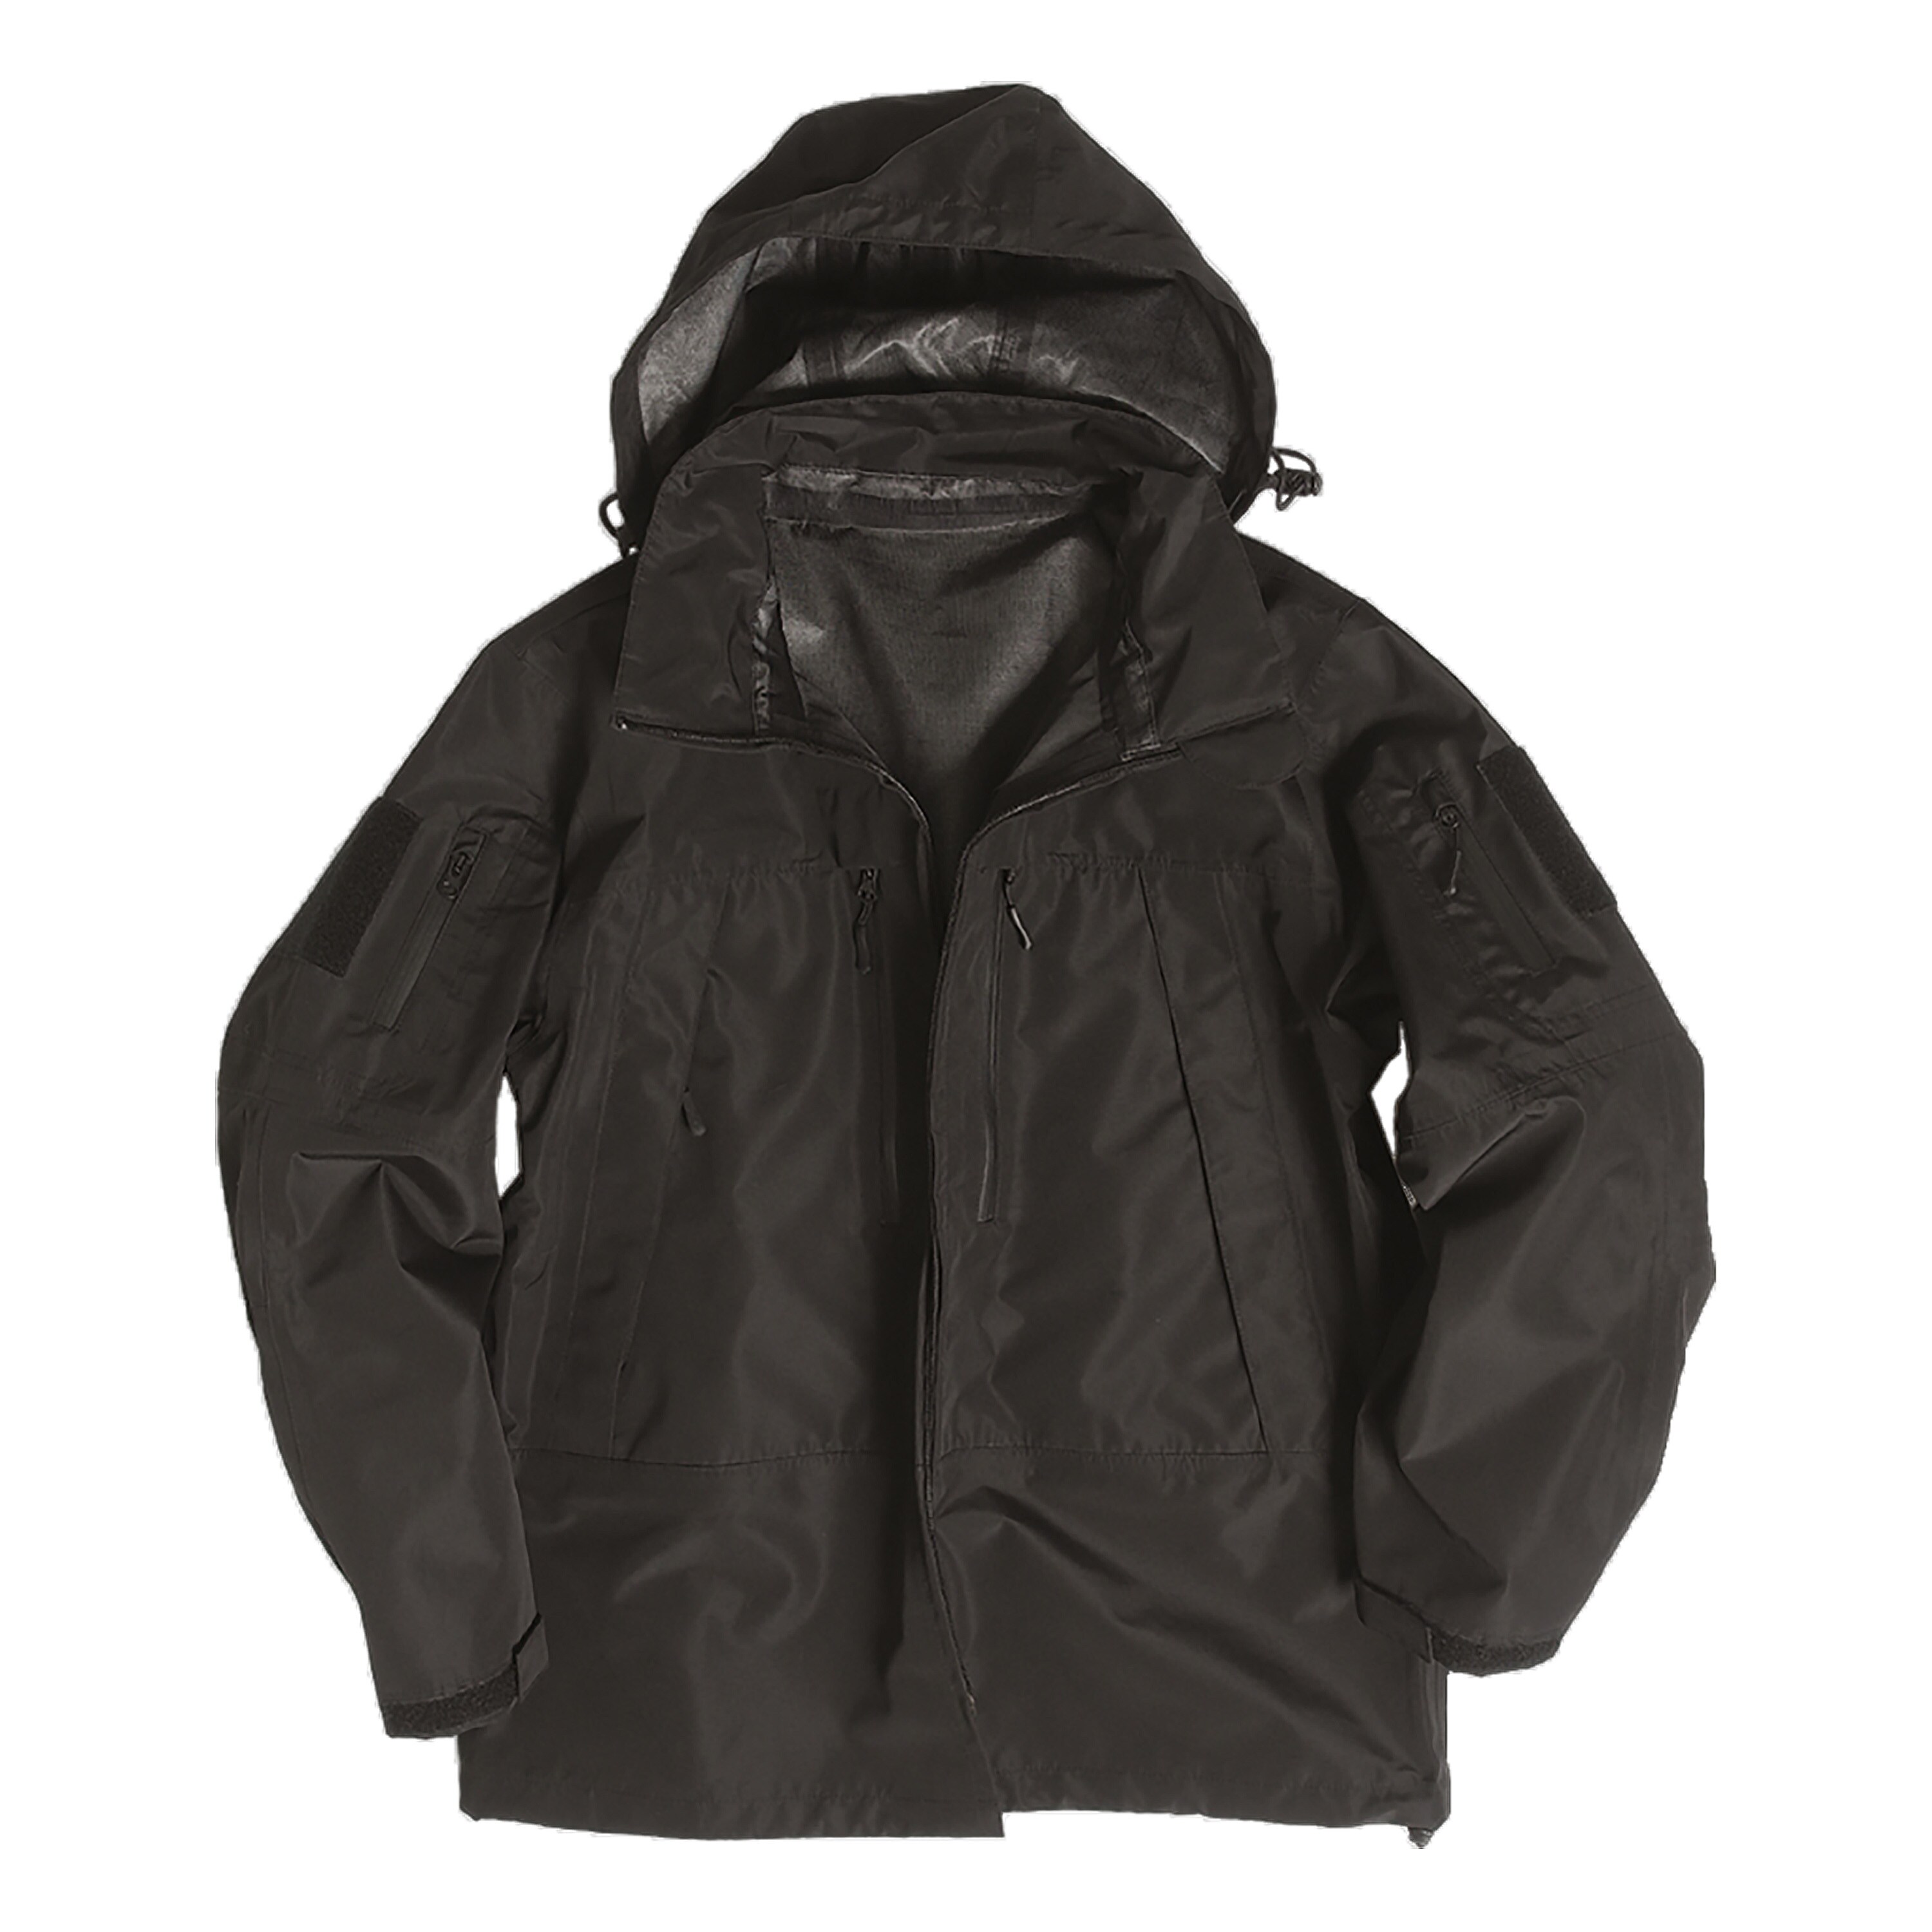 Purchase the Softshell Jacket PCU black by ASMC